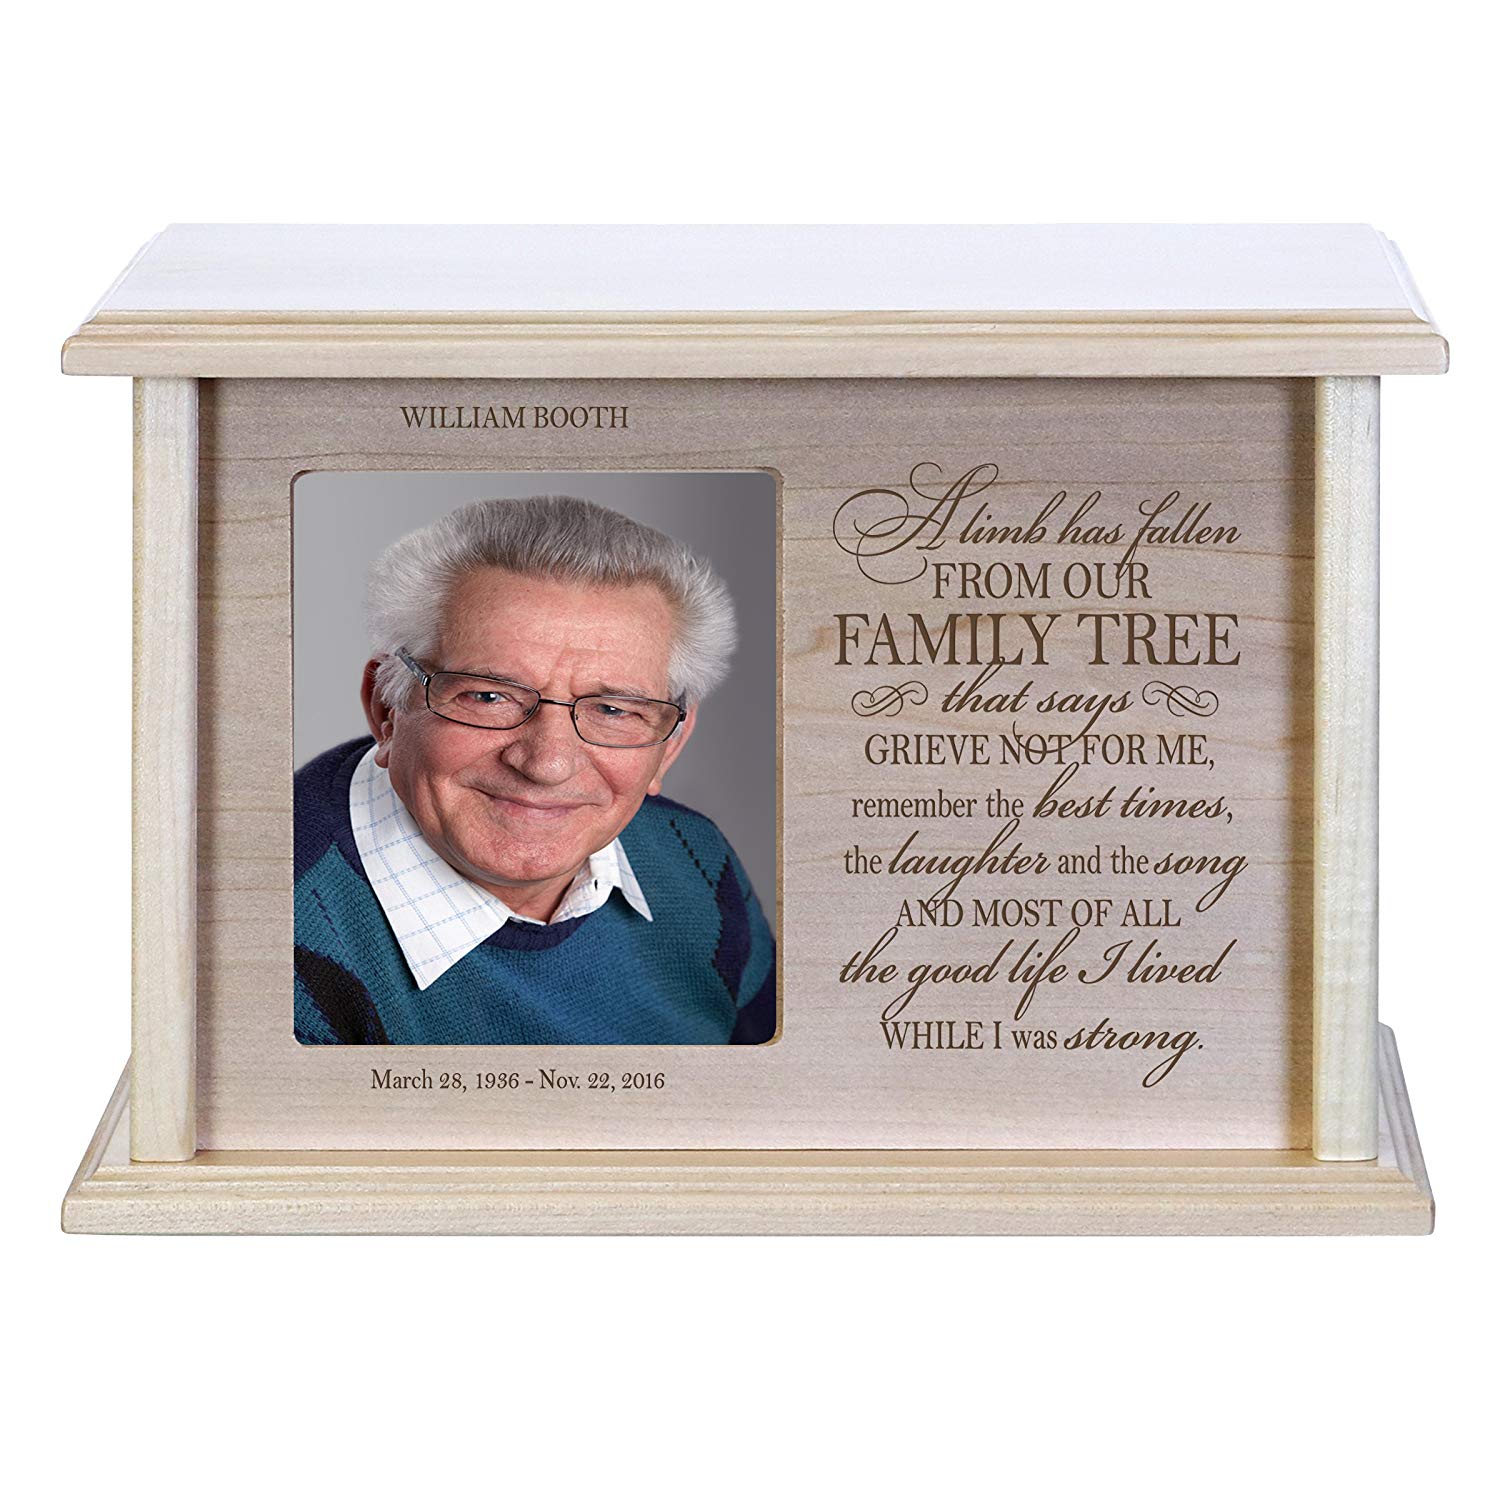 Custom Wooden Cremation Urn with Picture Frame holds 4x5 photo - A Limb Has Fallen (Poems) - LifeSong Milestones